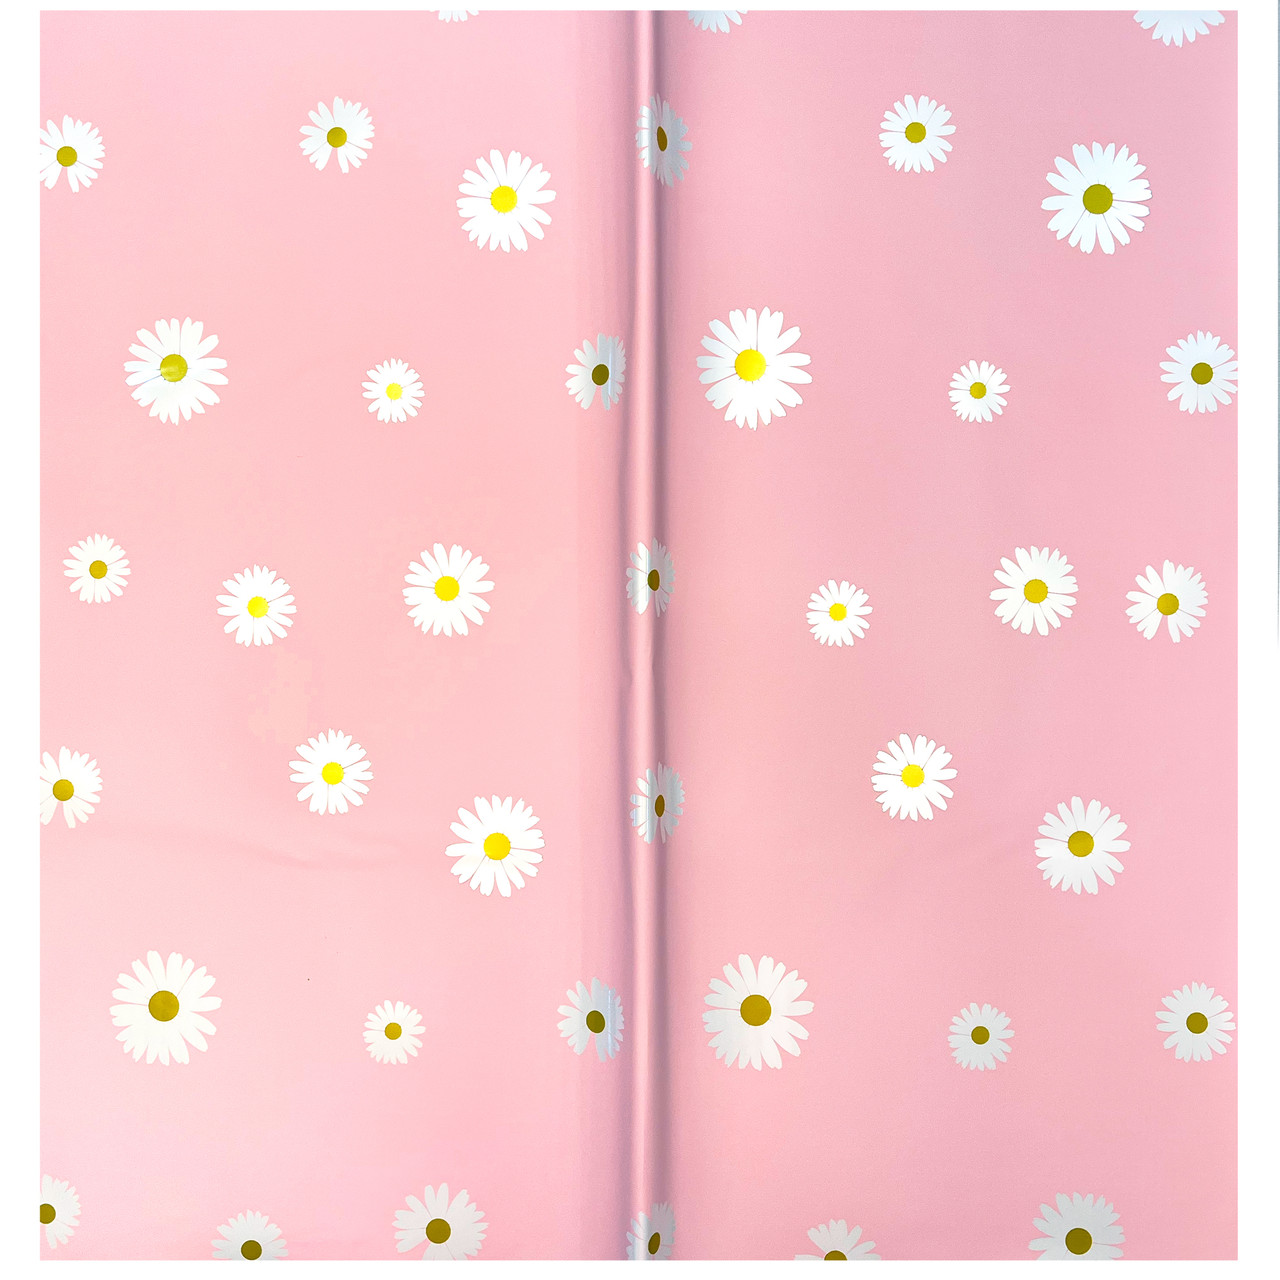 Daisy Print Peony Floral Wrapping Paper - 20 Sheets - LO Florist Supplies